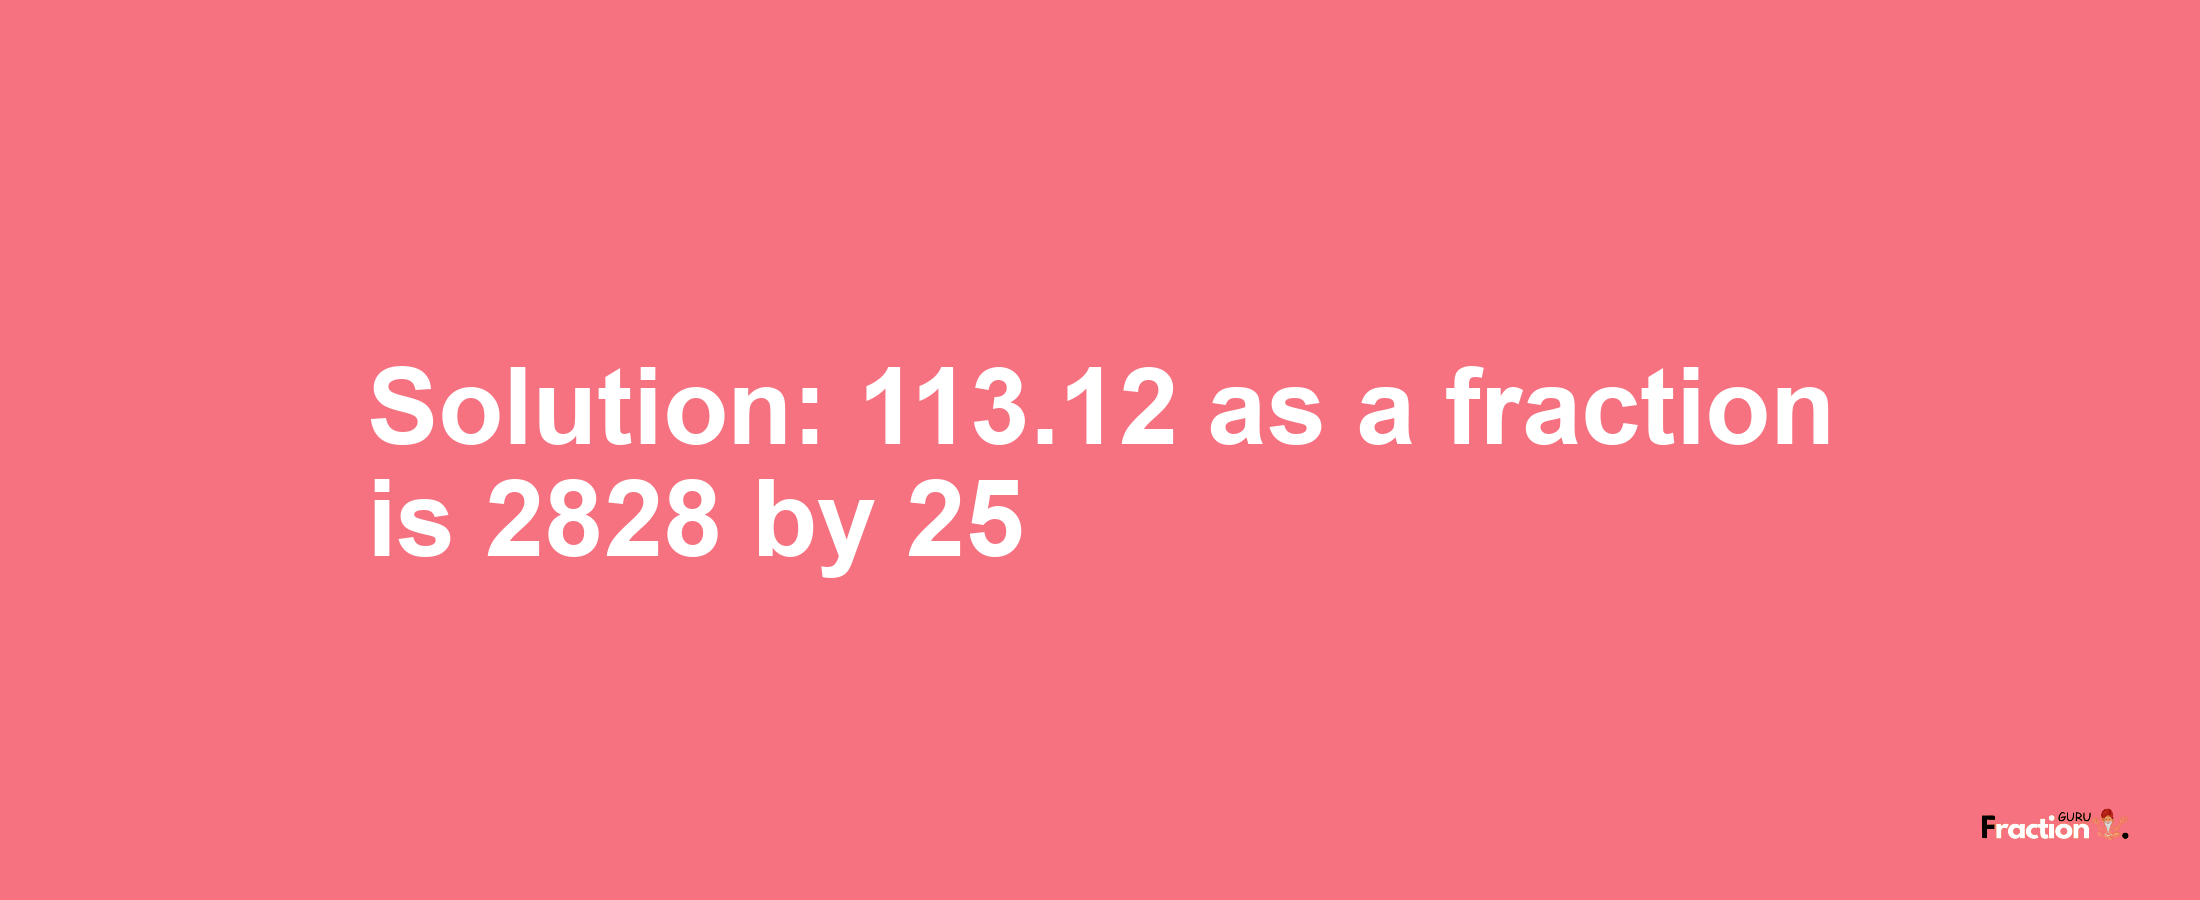 Solution:113.12 as a fraction is 2828/25